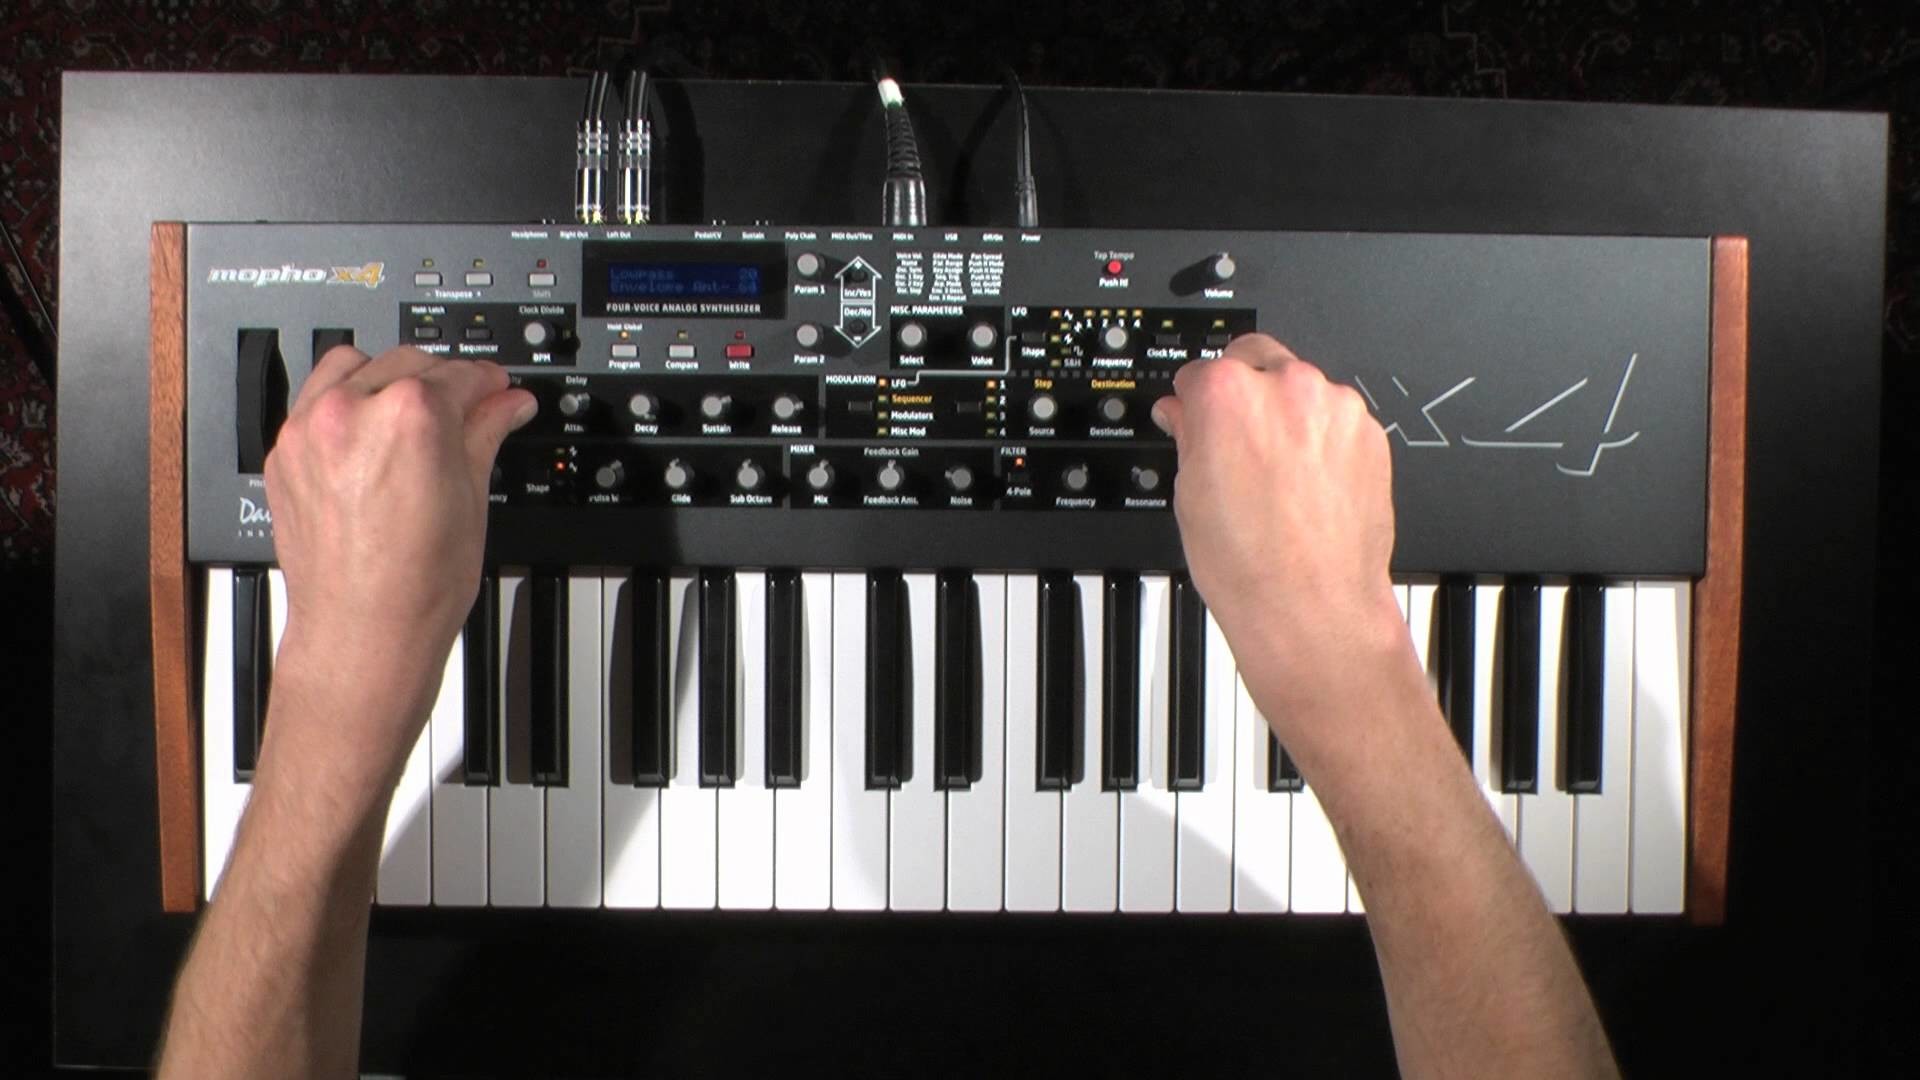 1920x1080 Video: Mopho x4 Demo- Dave Smith Instruments